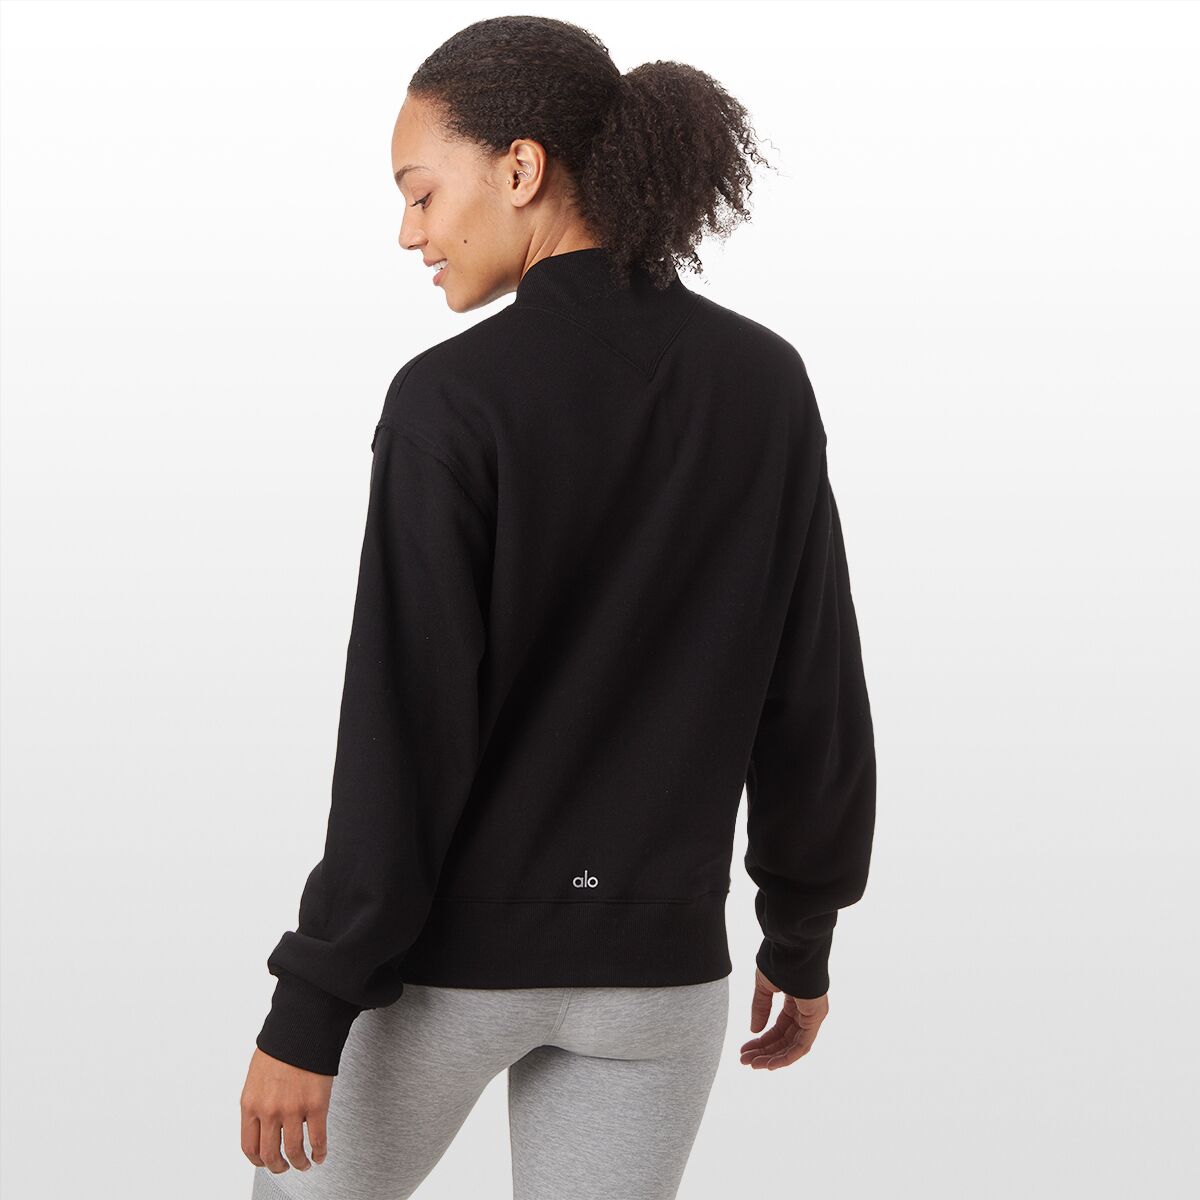 Alo Relaxed Athletic Sweatshirts for Women